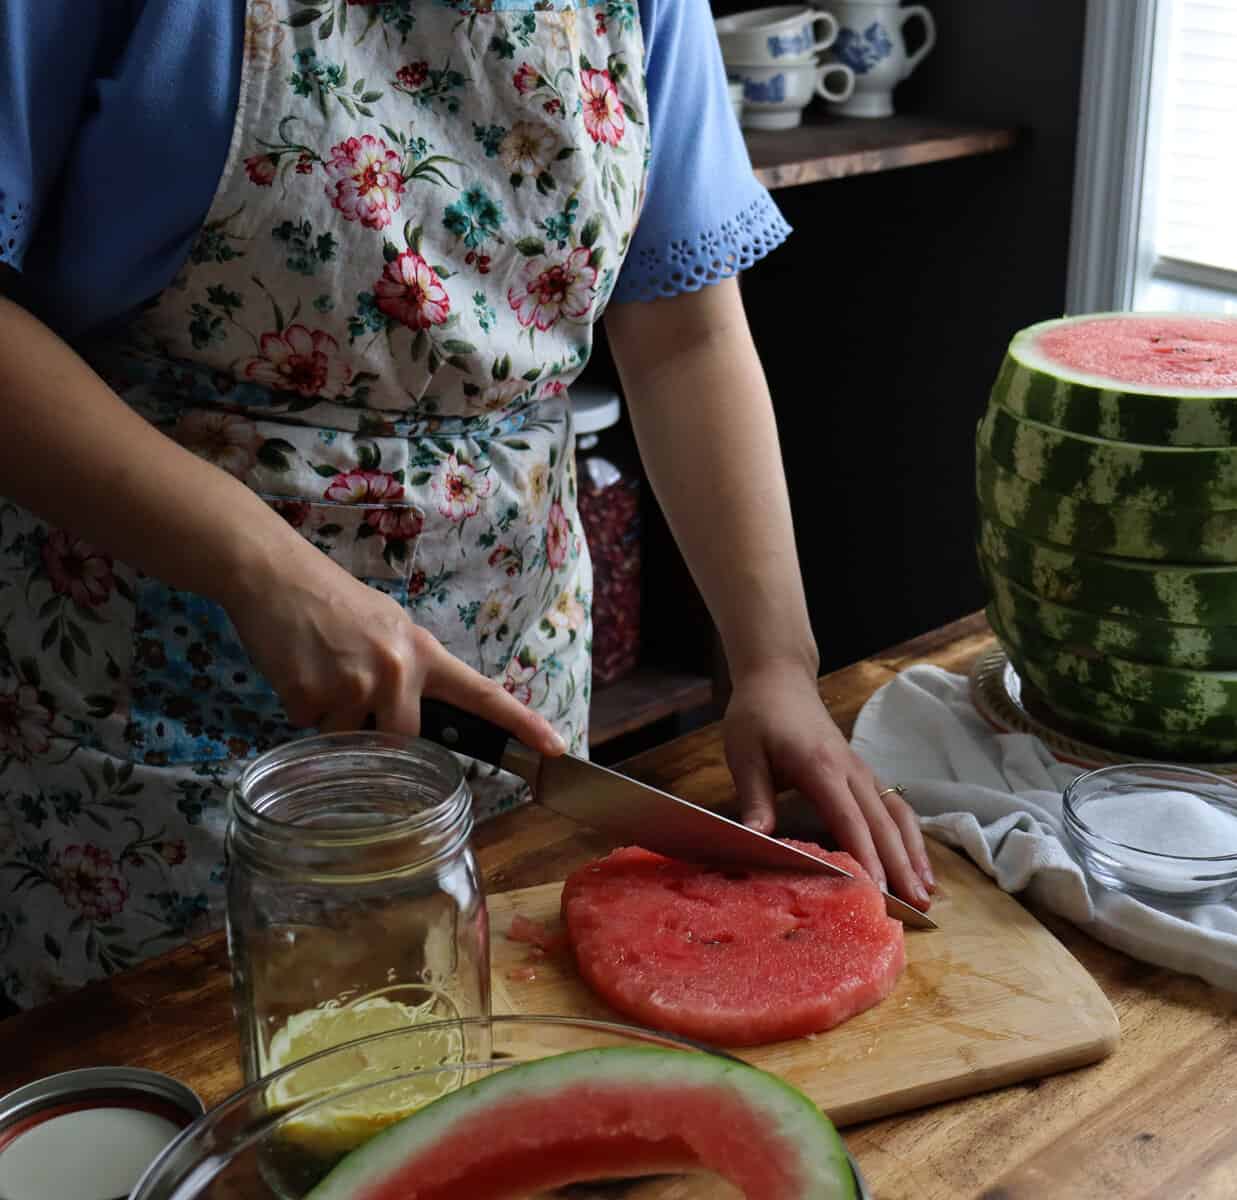 cutting the watermelon into cubes that will fit into a quart size jar